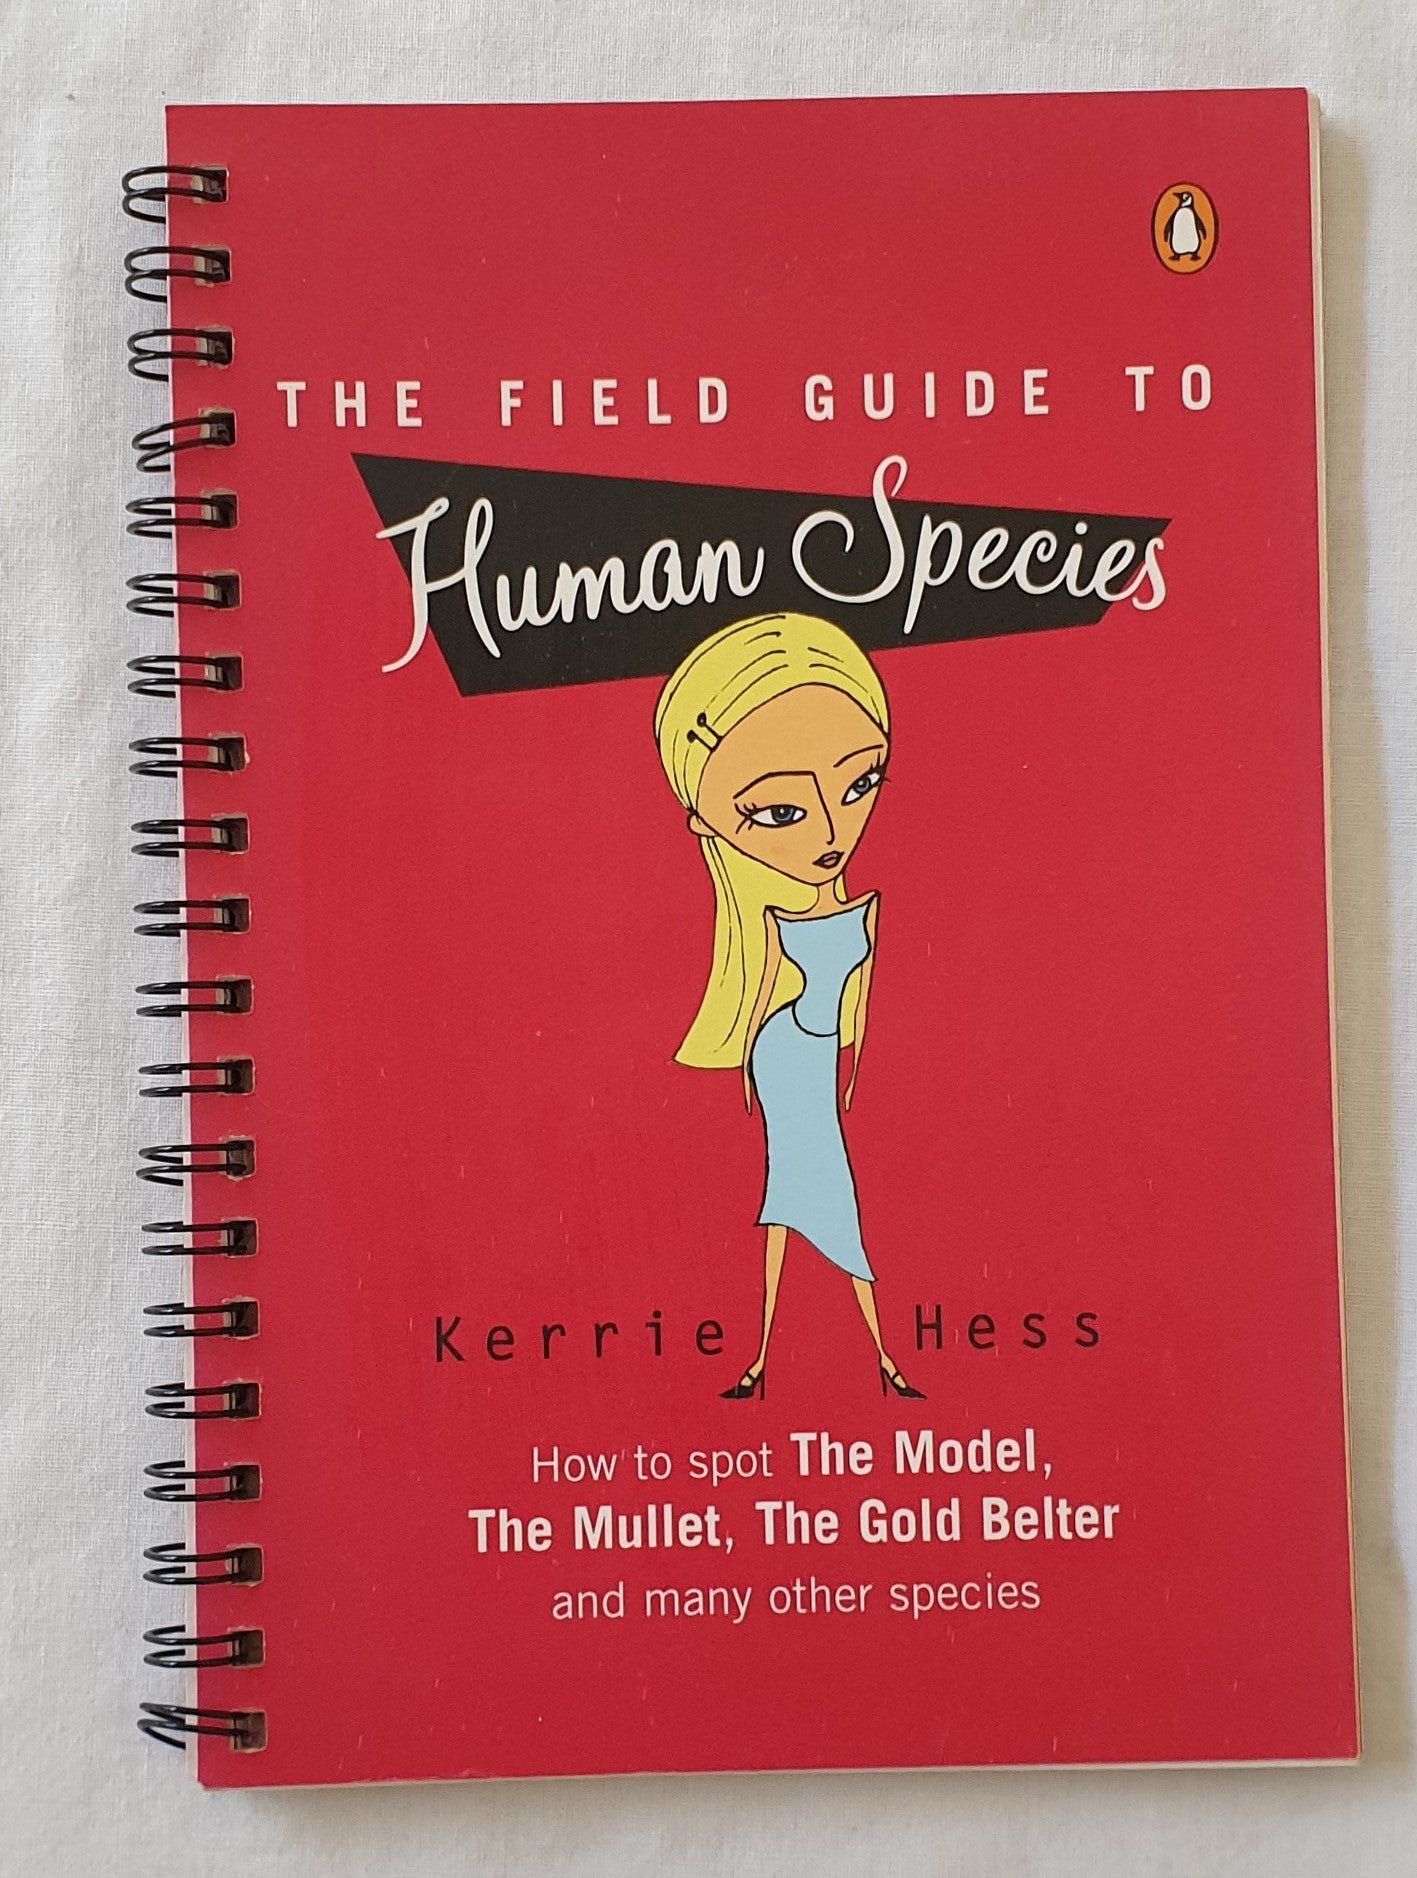 The Field Guide to Human Species by Kerrie Hess